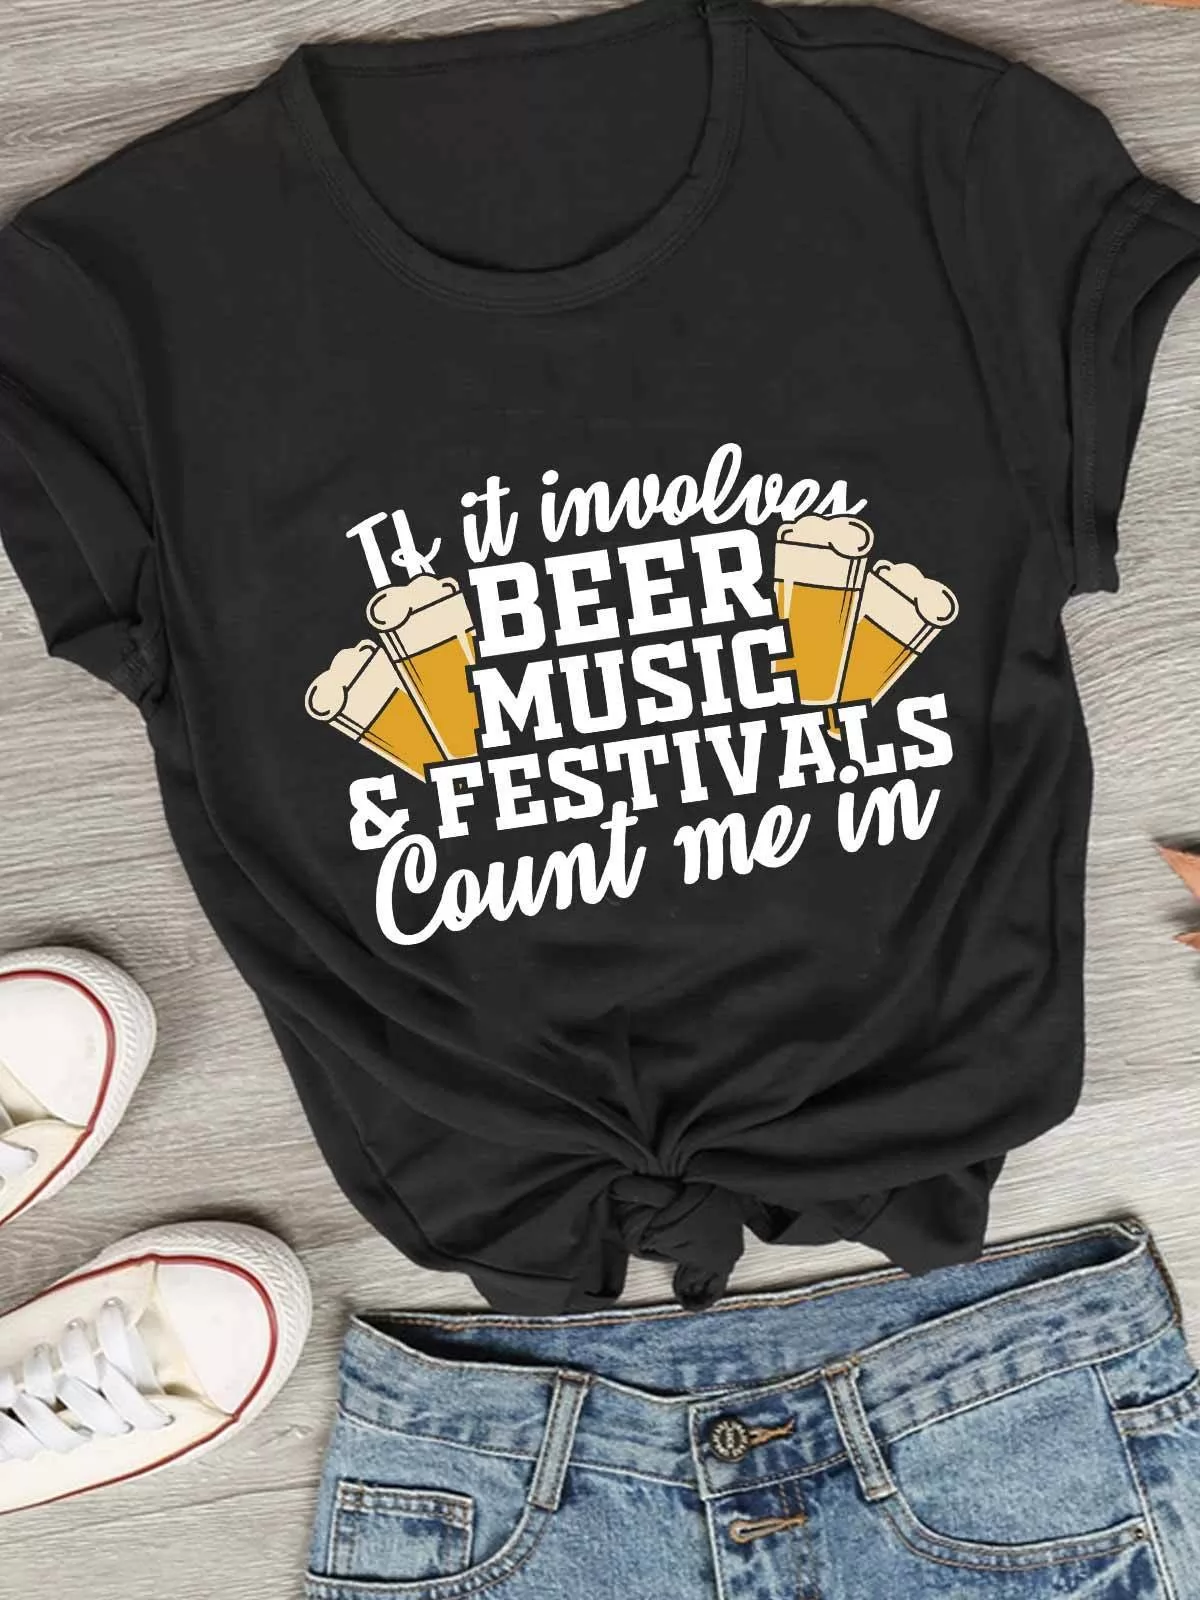 Let's Go To The Beer Music Festivals T-Shirt